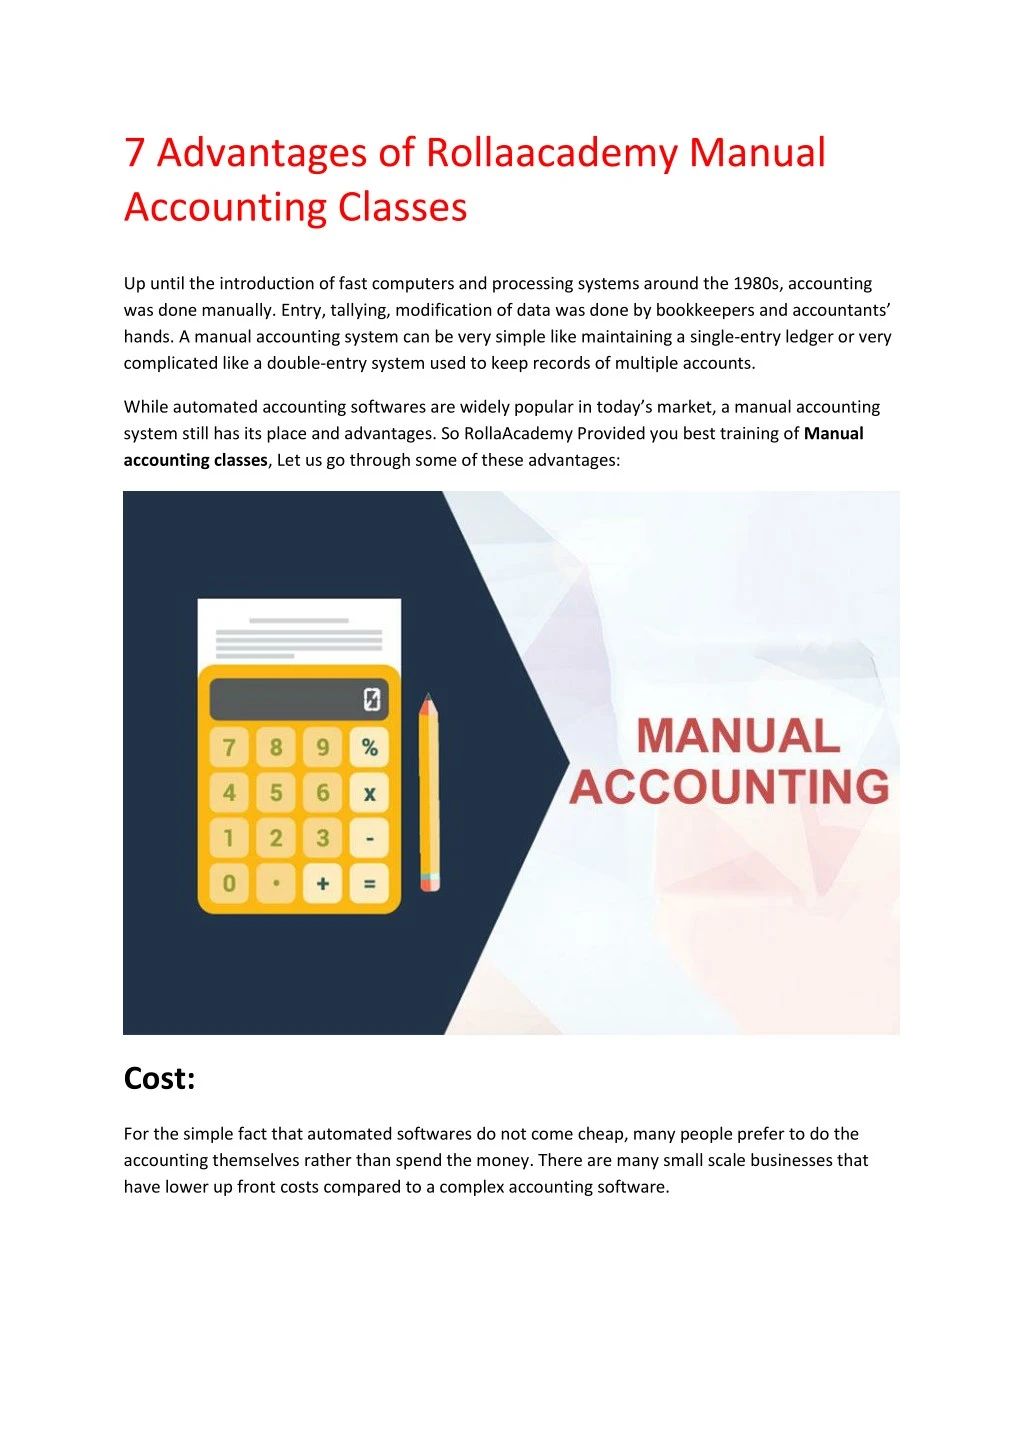 7 advantages of rollaacademy manual accounting